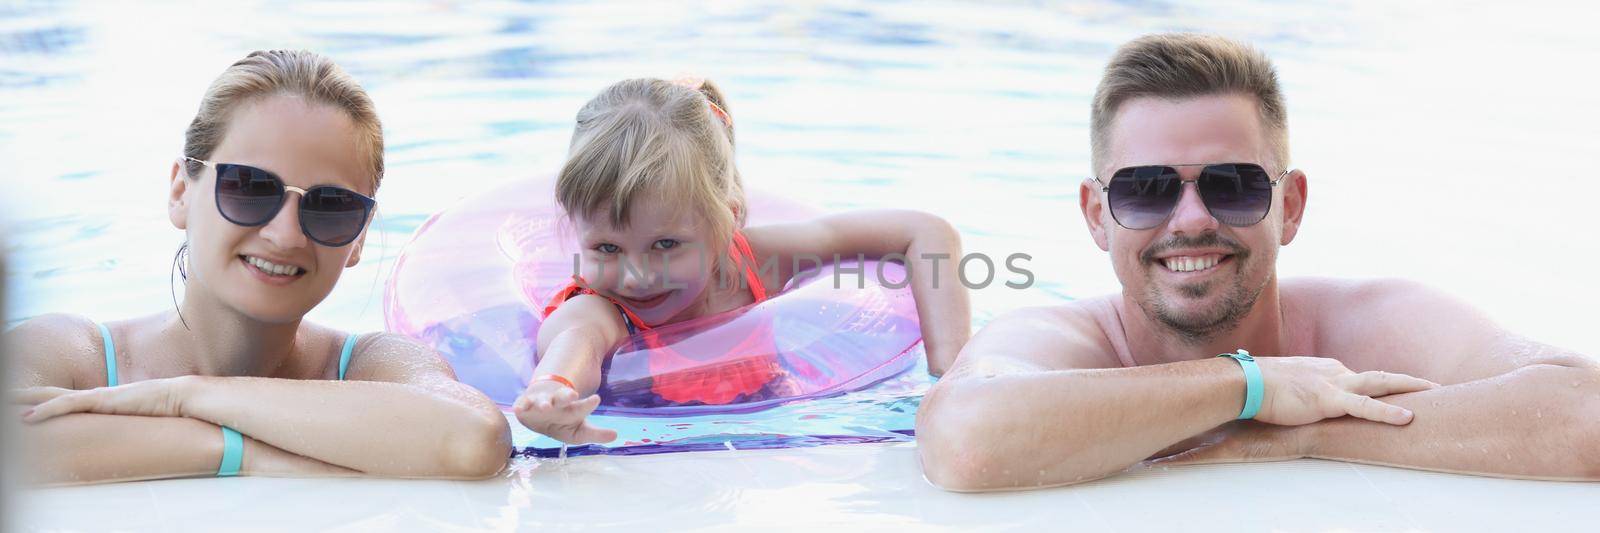 Portrait of happy family posing for picture together in swimming pool. Memorable vacation in luxury resort, family holiday. Summer, childhood, trip concept